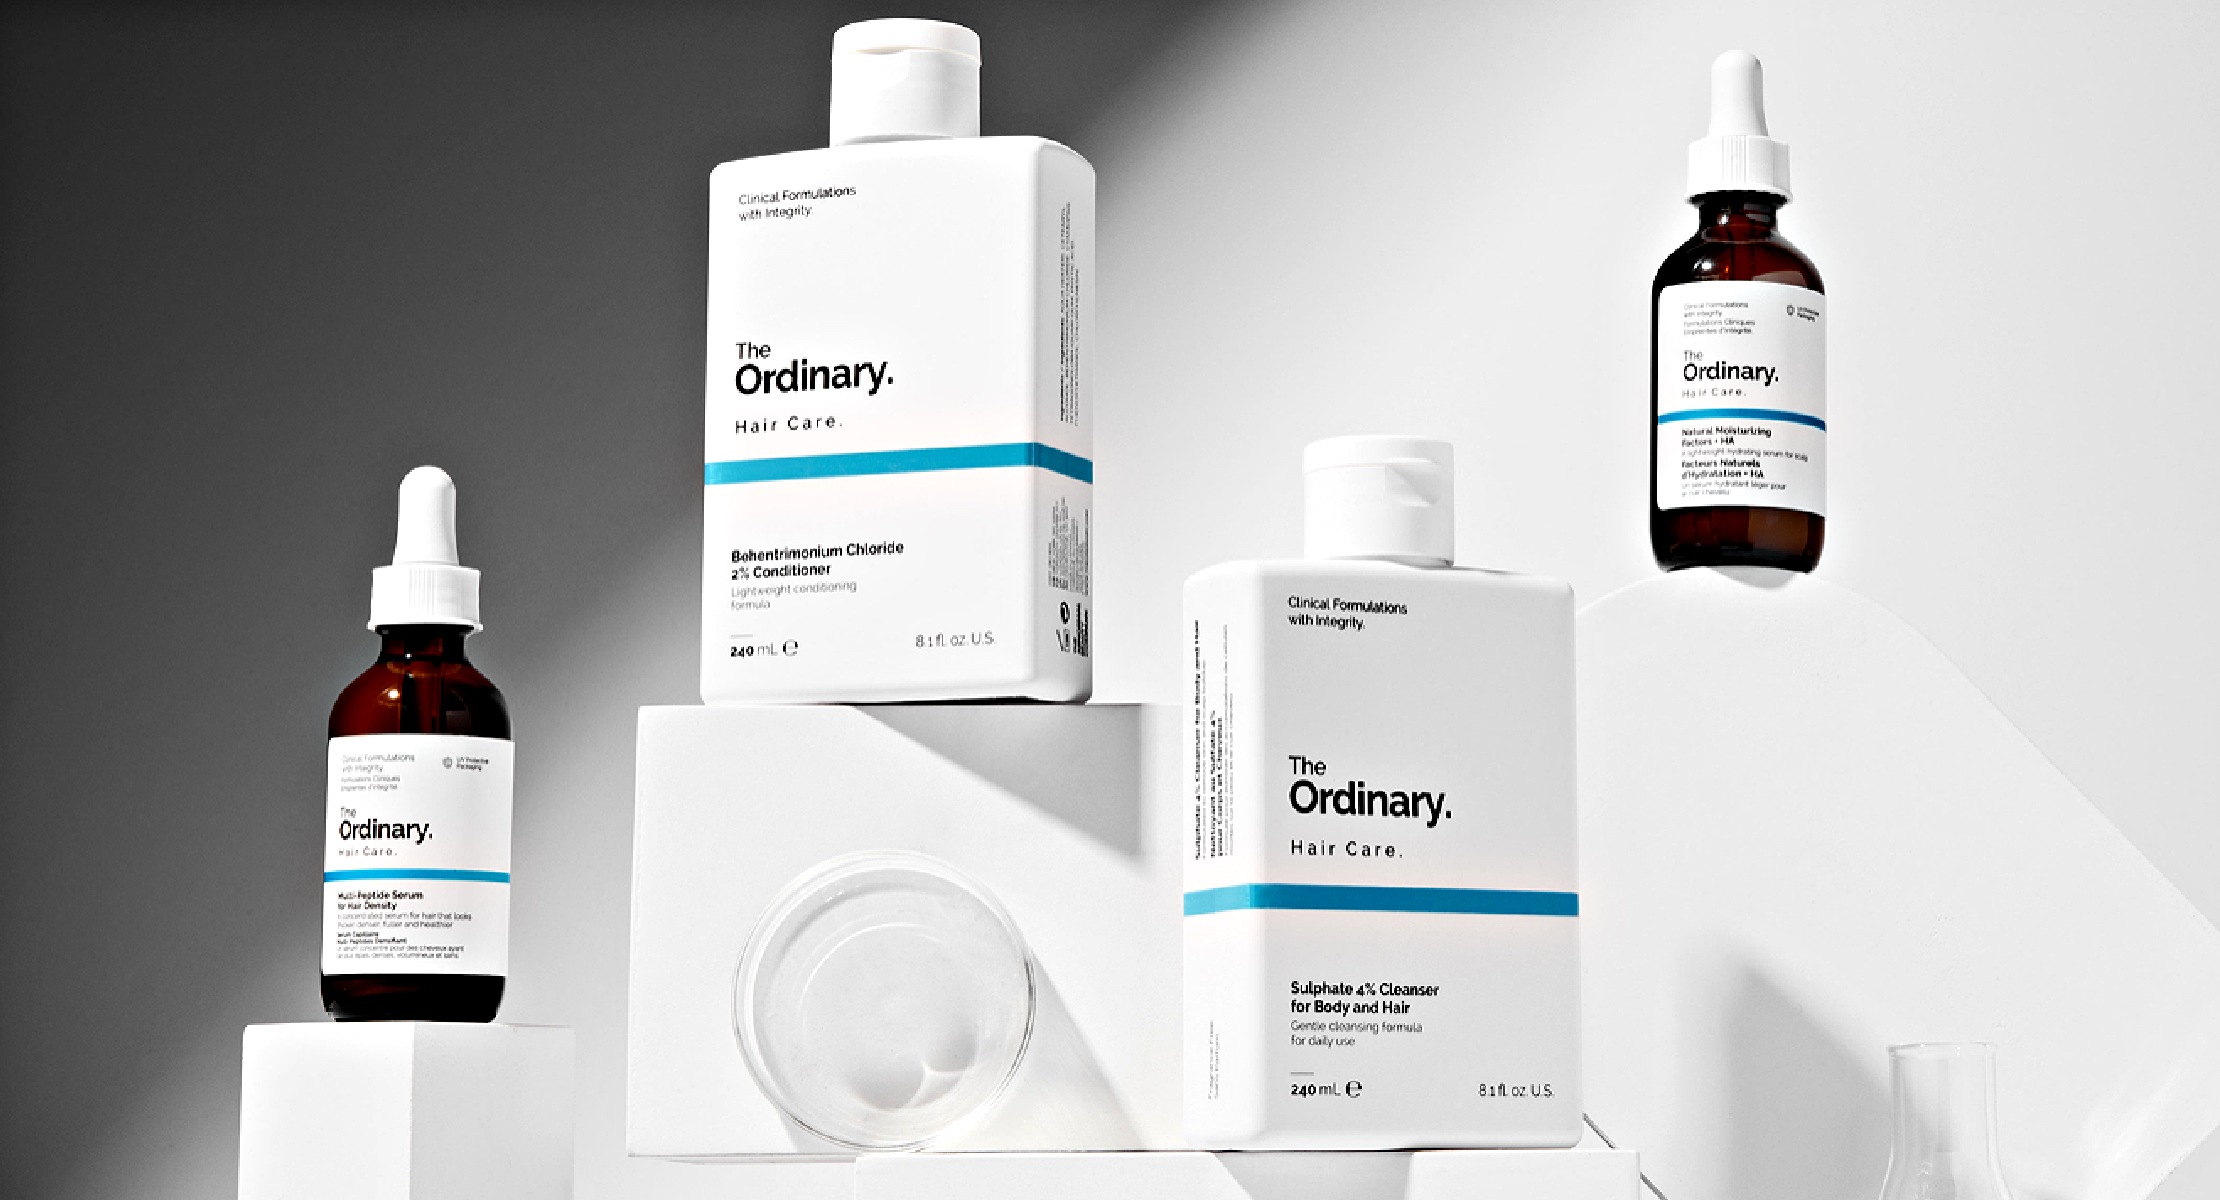 The Ordinary Launches Haircare